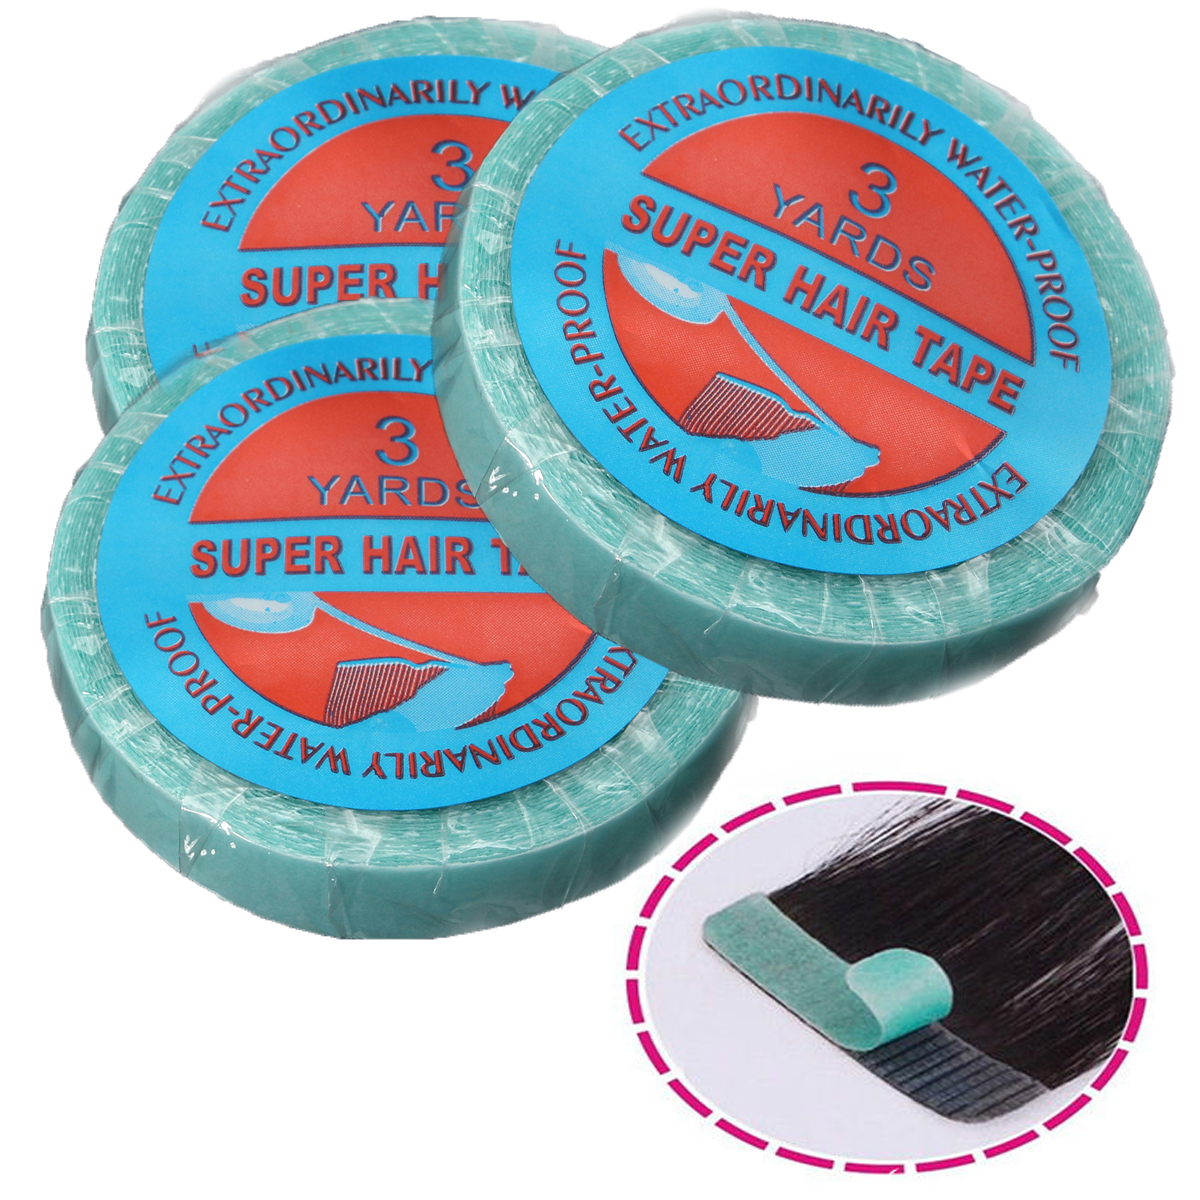 1-Roll-3yards-Hair-Extension-Tape-Extra-Strong-Double-Sided-Hair-Adhesive-for-Hair-Extensions-1257565